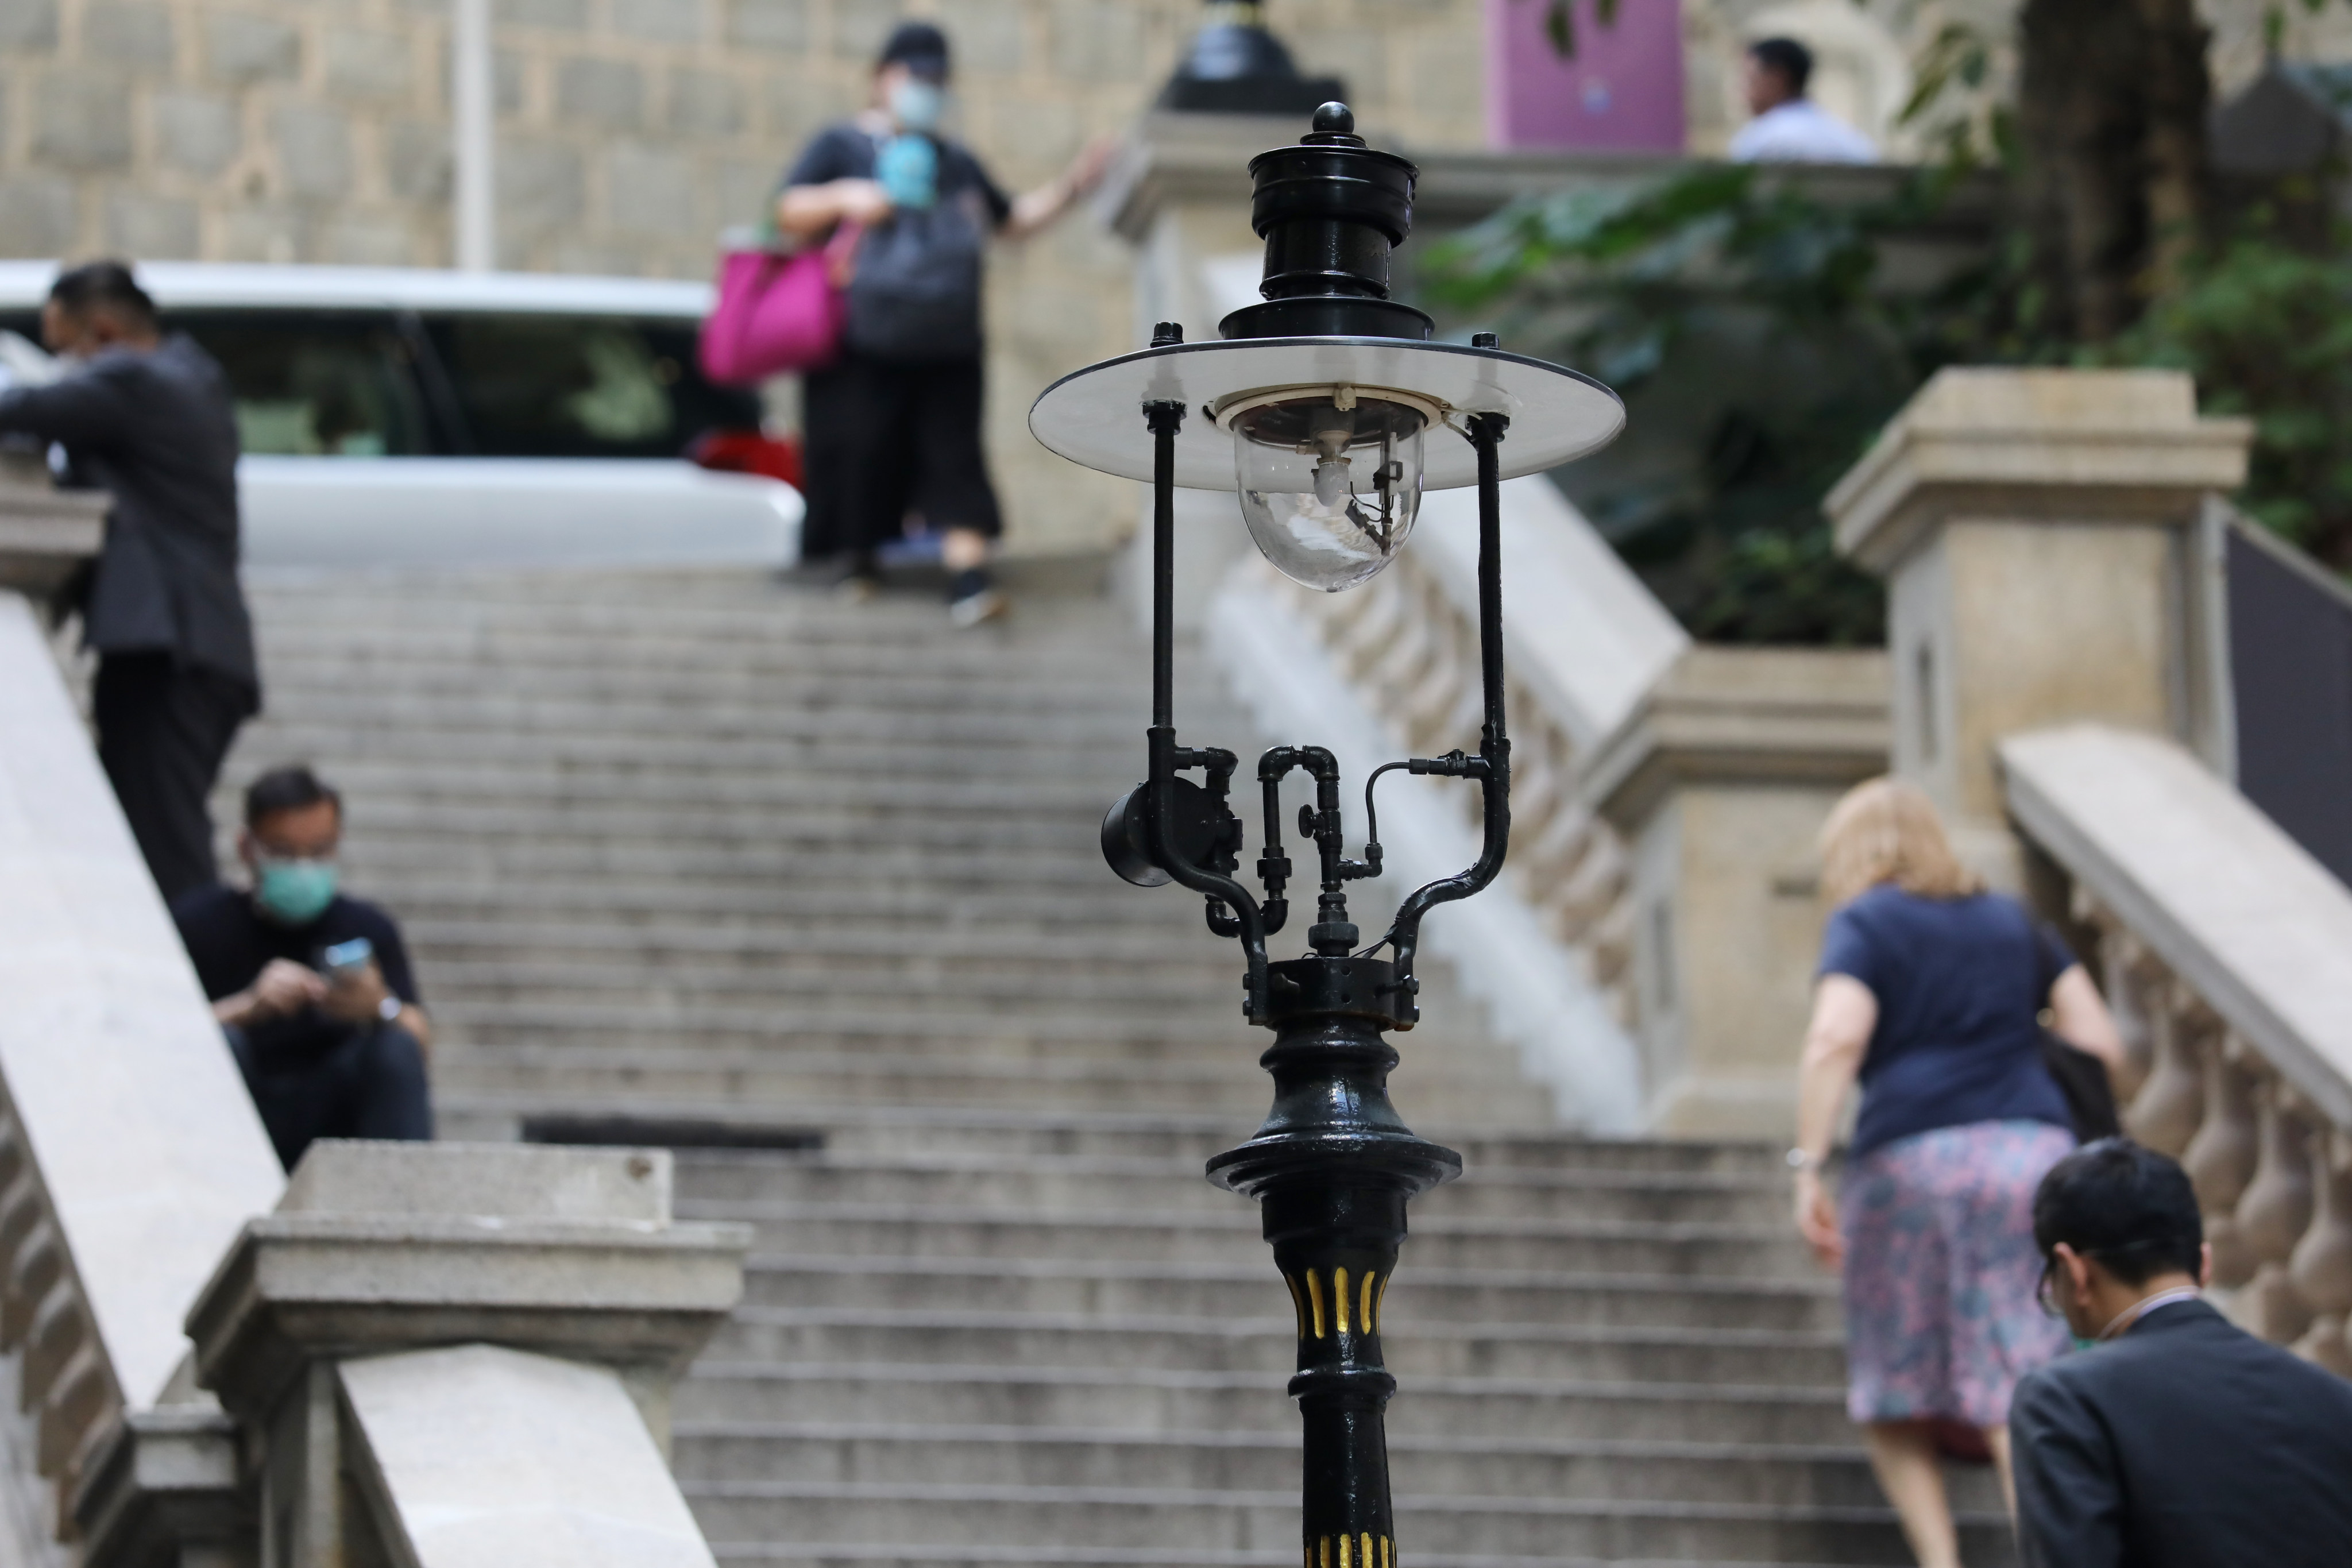 One of the surviving gas lamps in Duddell Street, Central, Hong Kong. Gas lighting was introduced in the then British colony in the 1860s. Photo: K. Y. Cheng